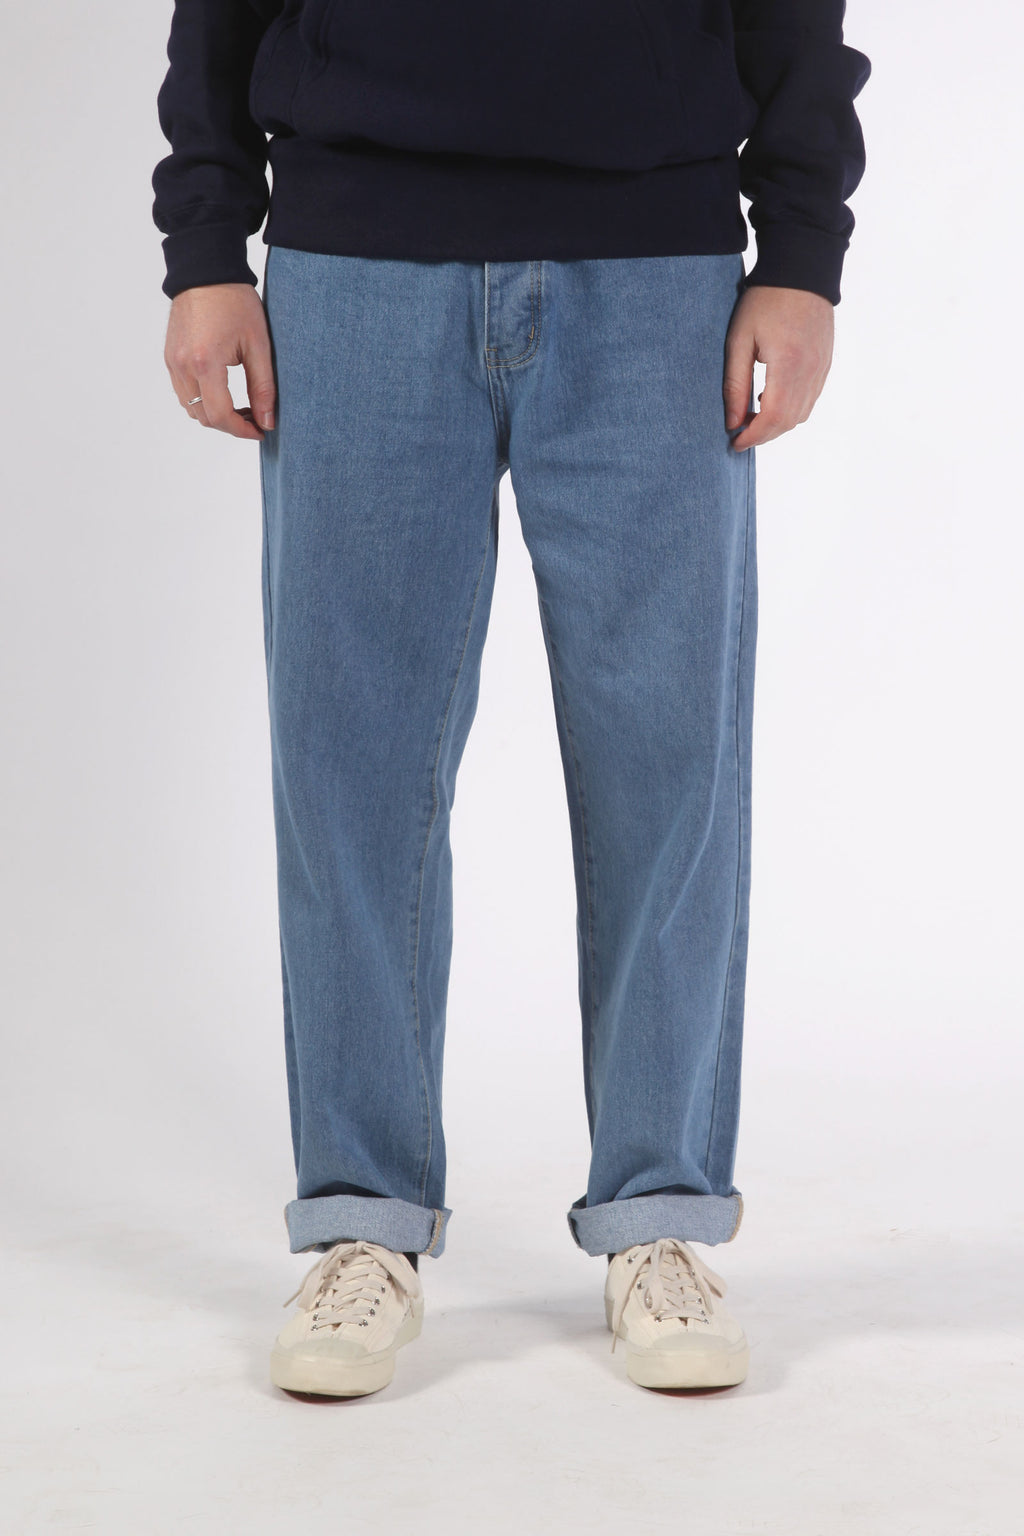 Power Goods - 90's Jeans - Washed Blue